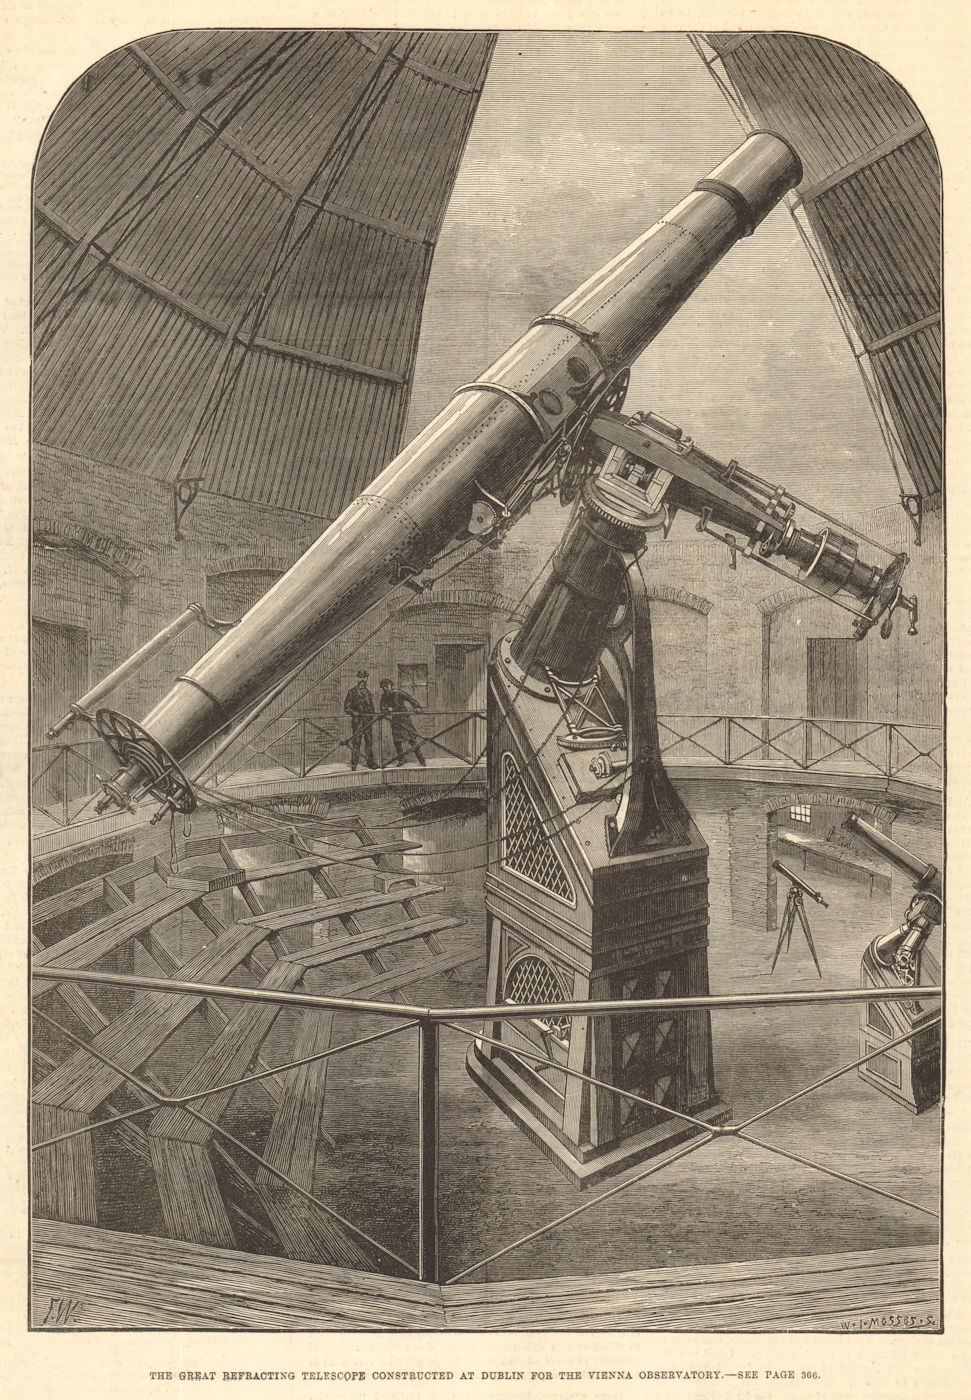 first used refracting telescope for astronomy